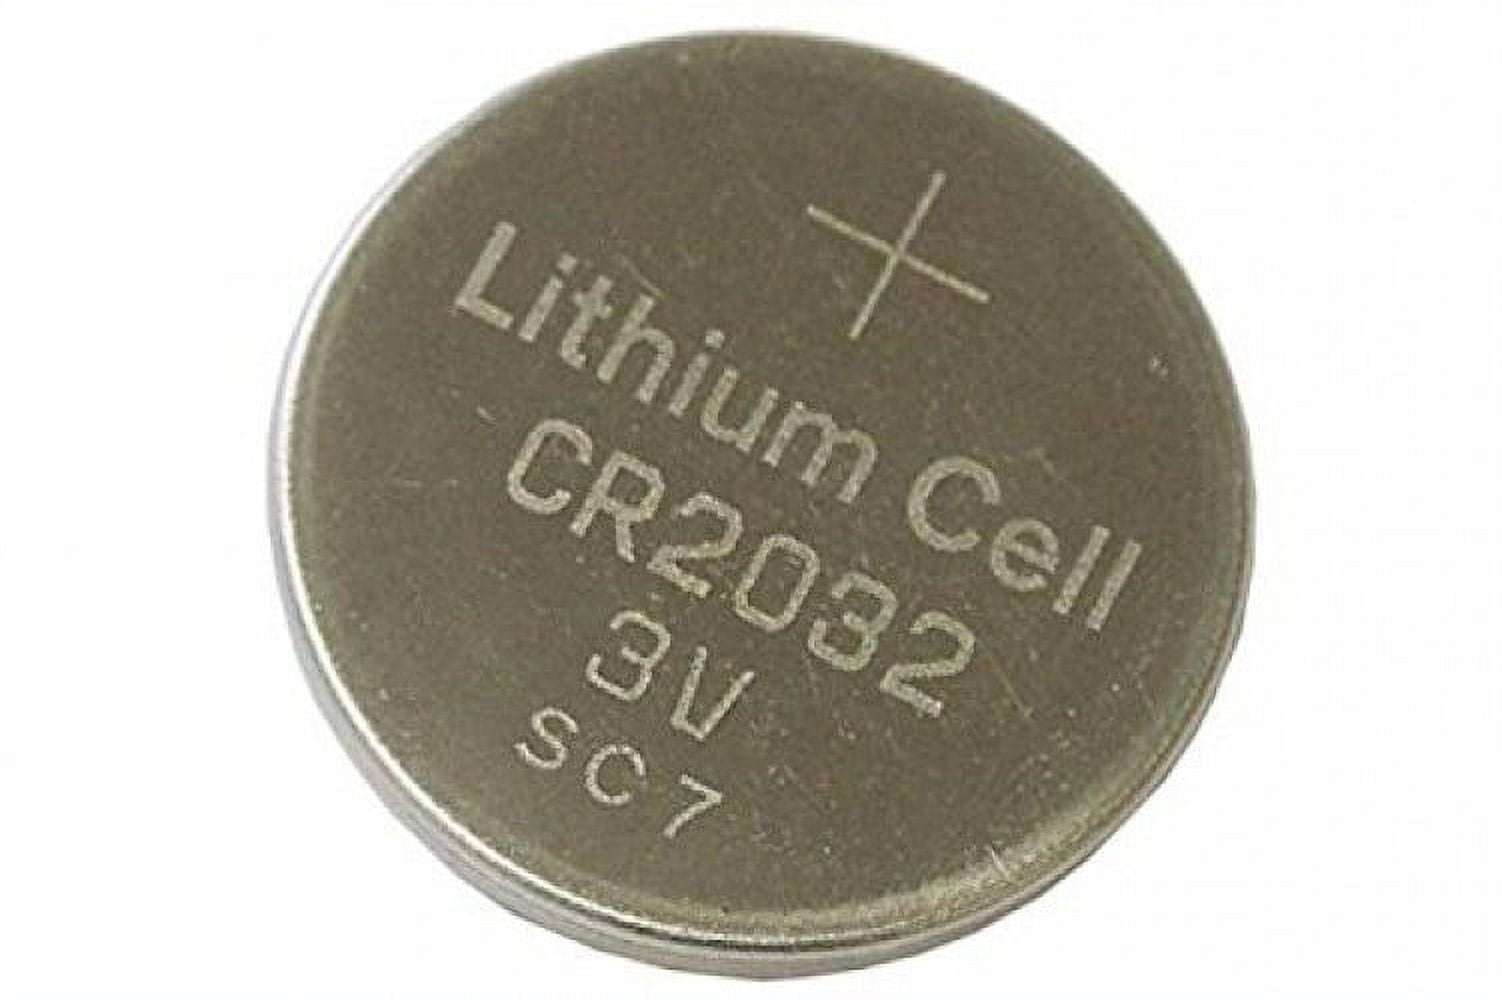 Maxell CR1220 220mAh 3V Lithium Battery with Button Design